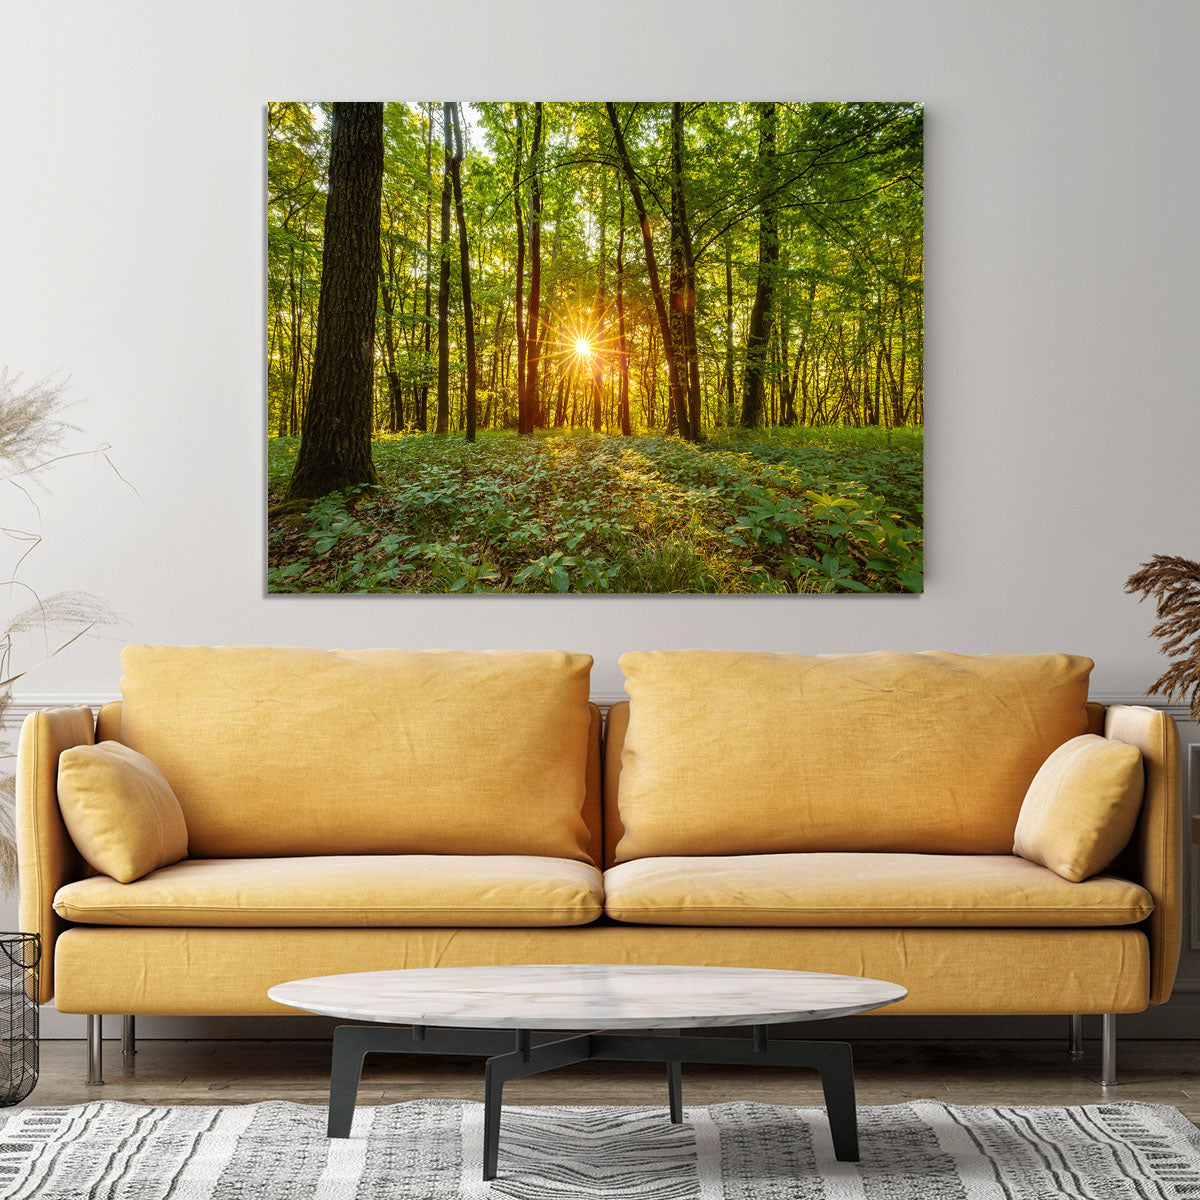 Dawn in the forest of Bavaria Canvas Print or Poster - Canvas Art Rocks - 4